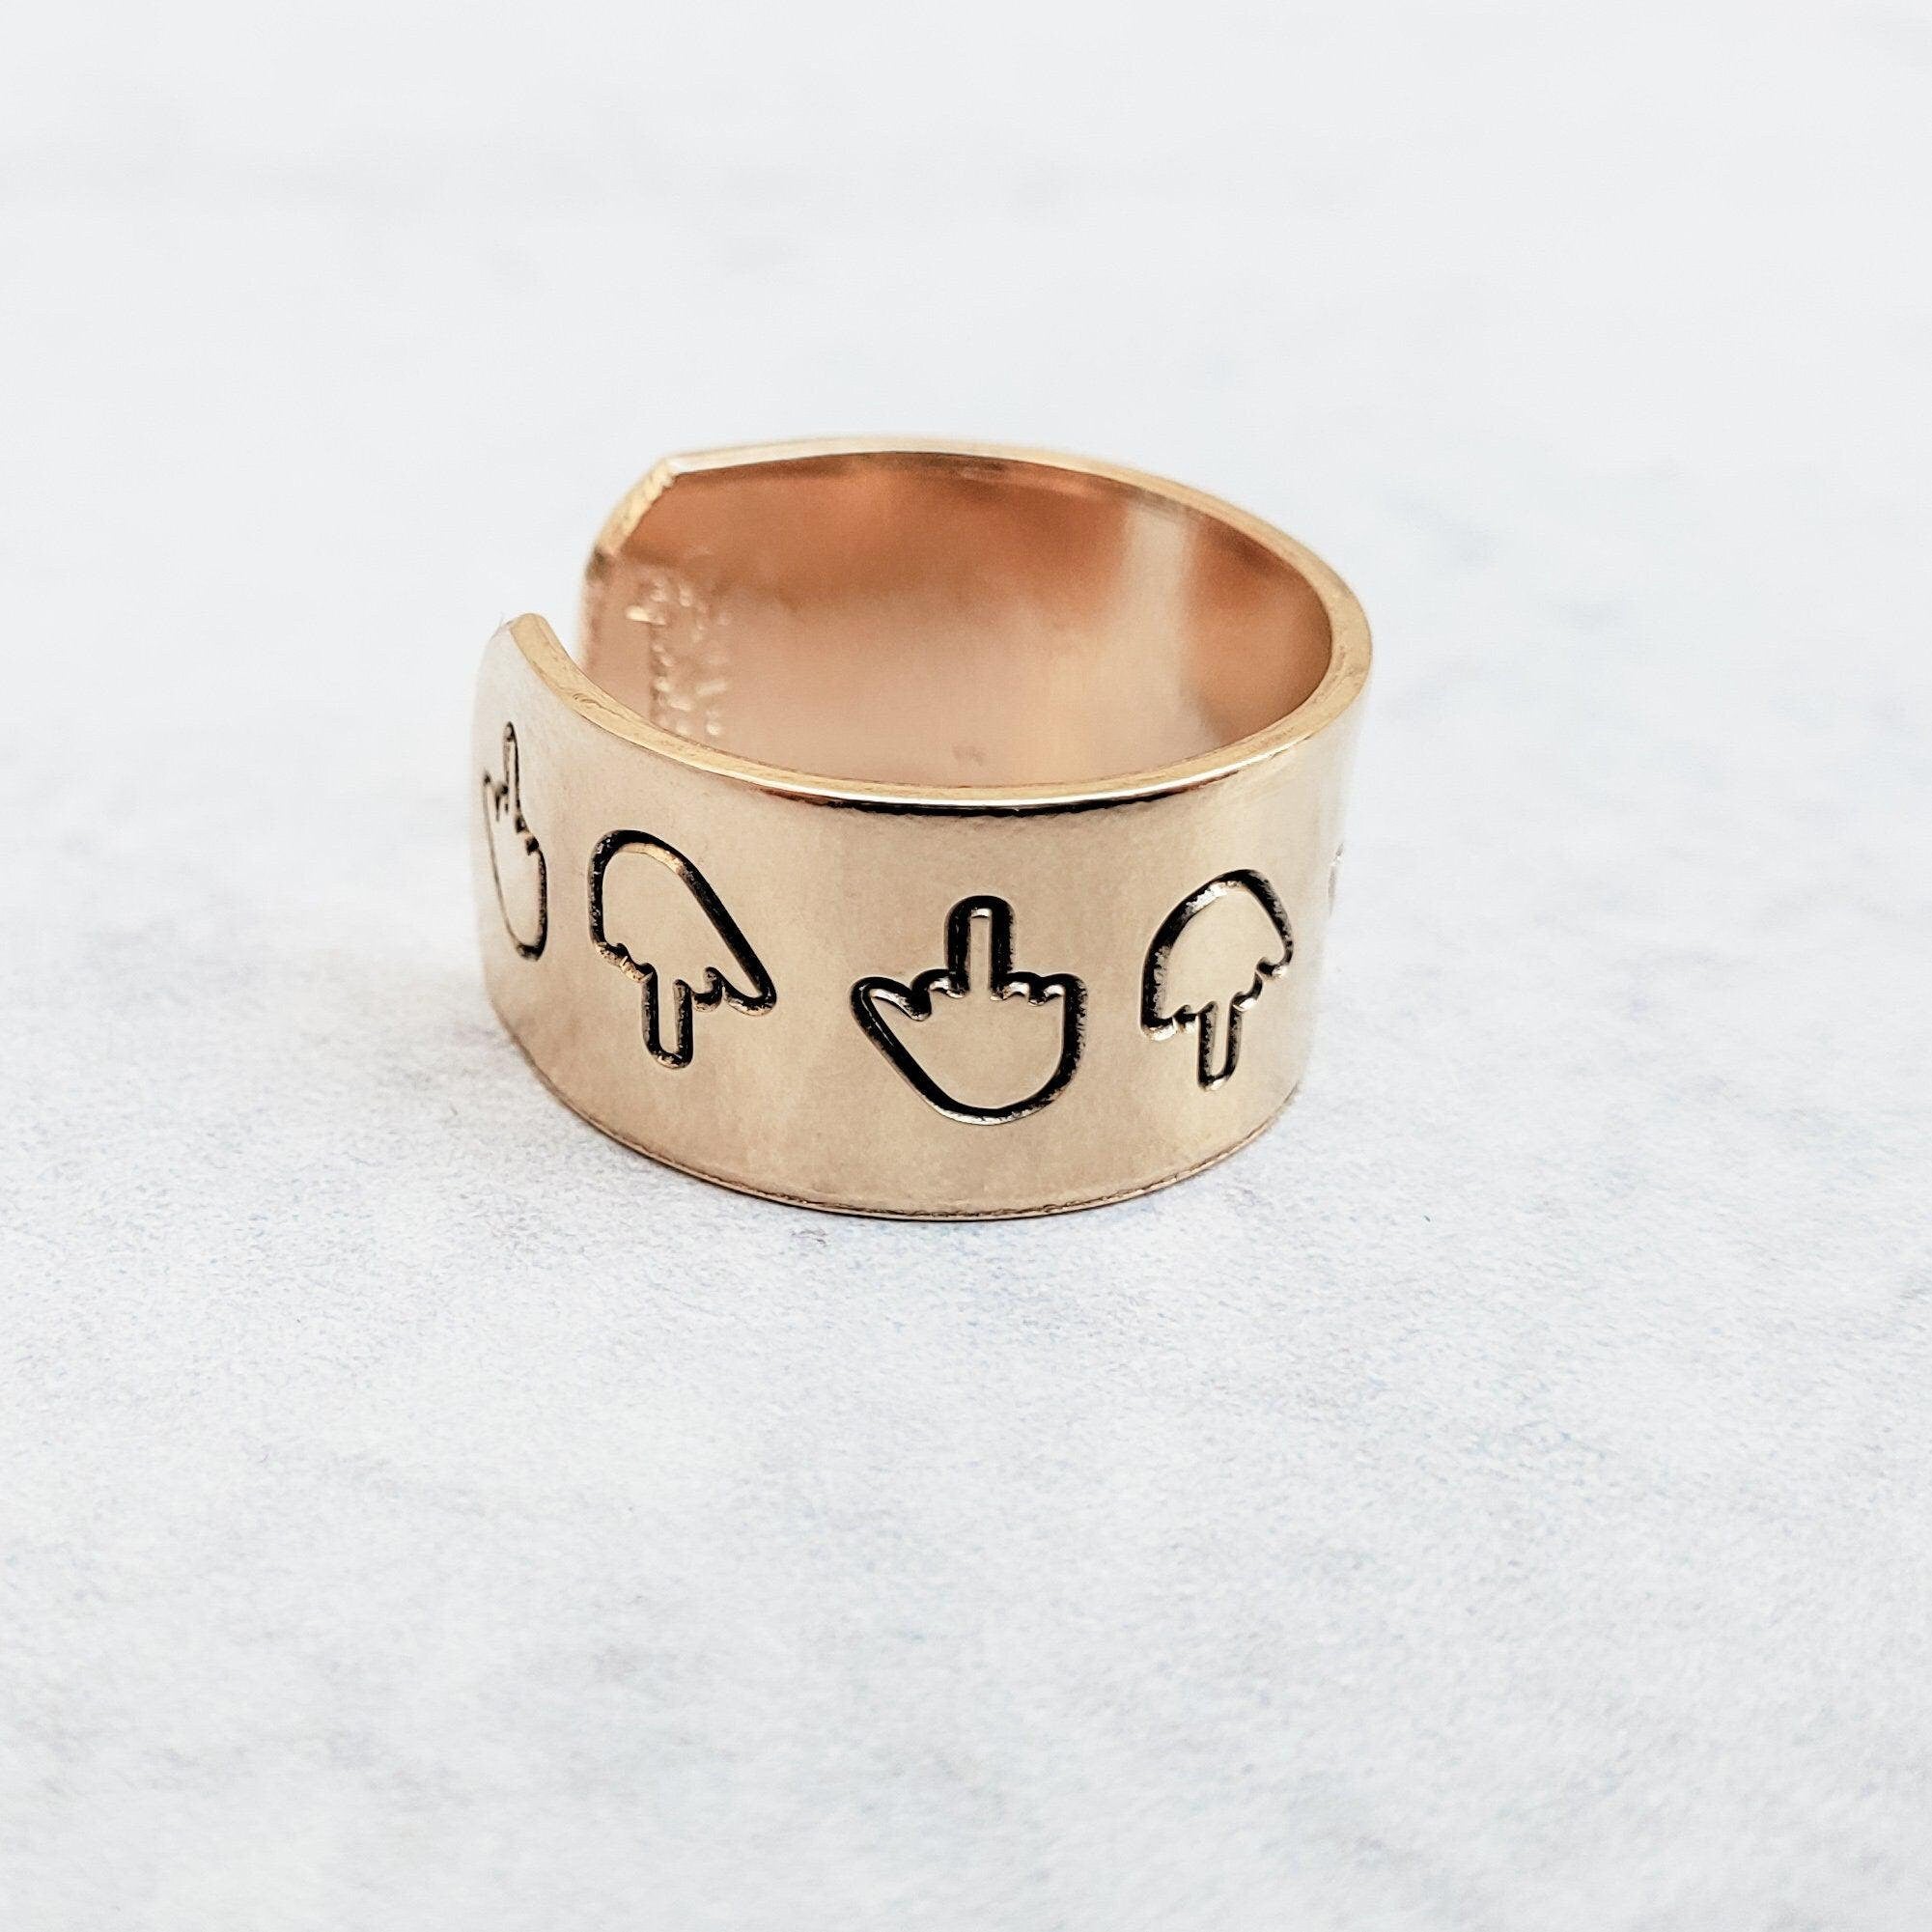 Magen David Middle Finger Ring - Funny Jewish Star Jewelry Salt and Sparkle